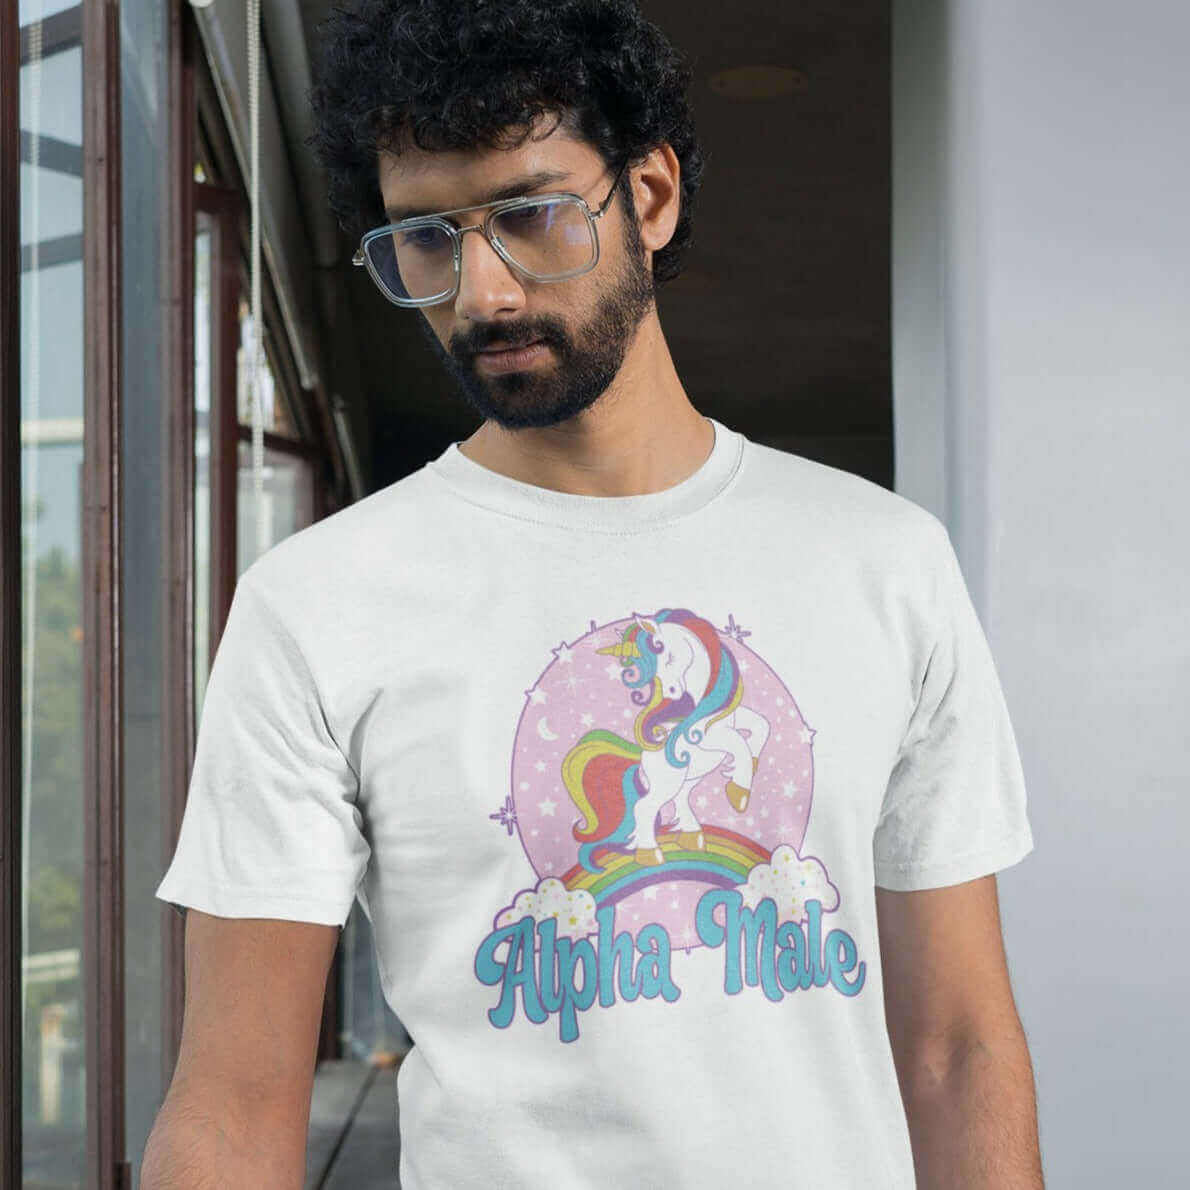 man wearing white t-tshirt that says Alpha Male with unicorn graphics